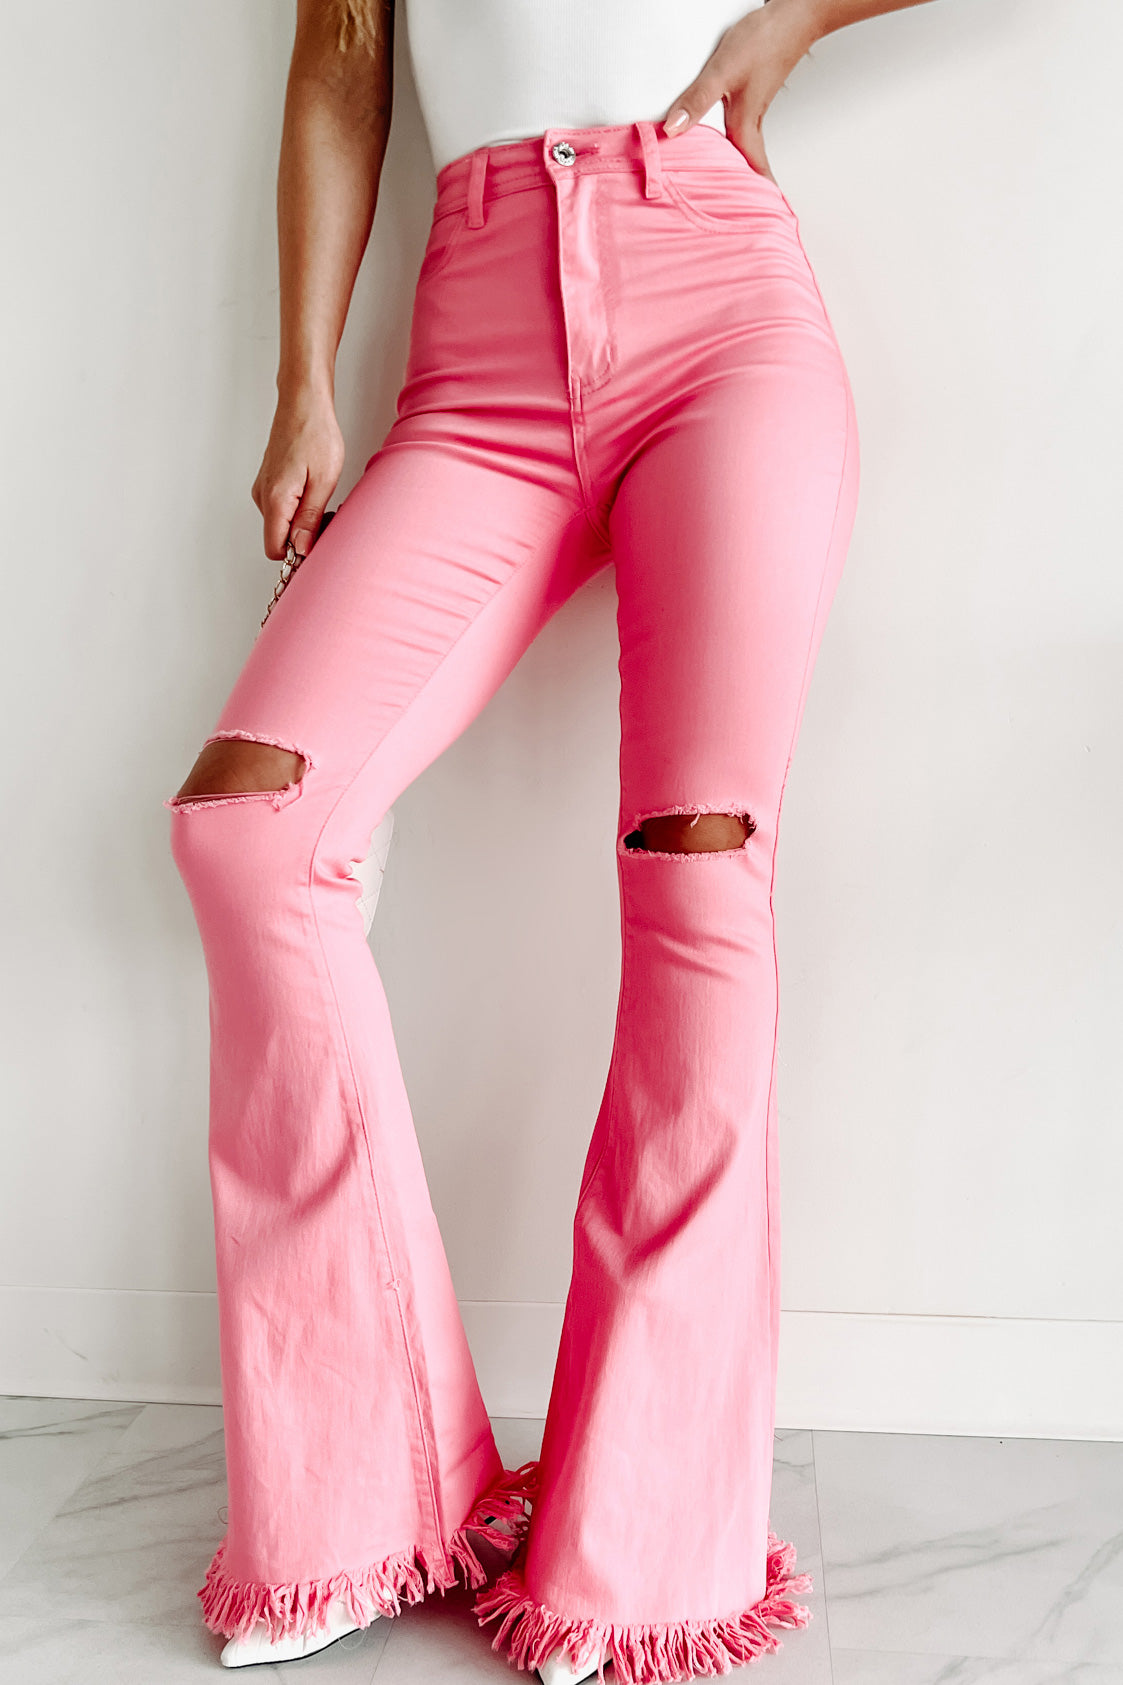 Pink Distressed Bell Bottom Jeans